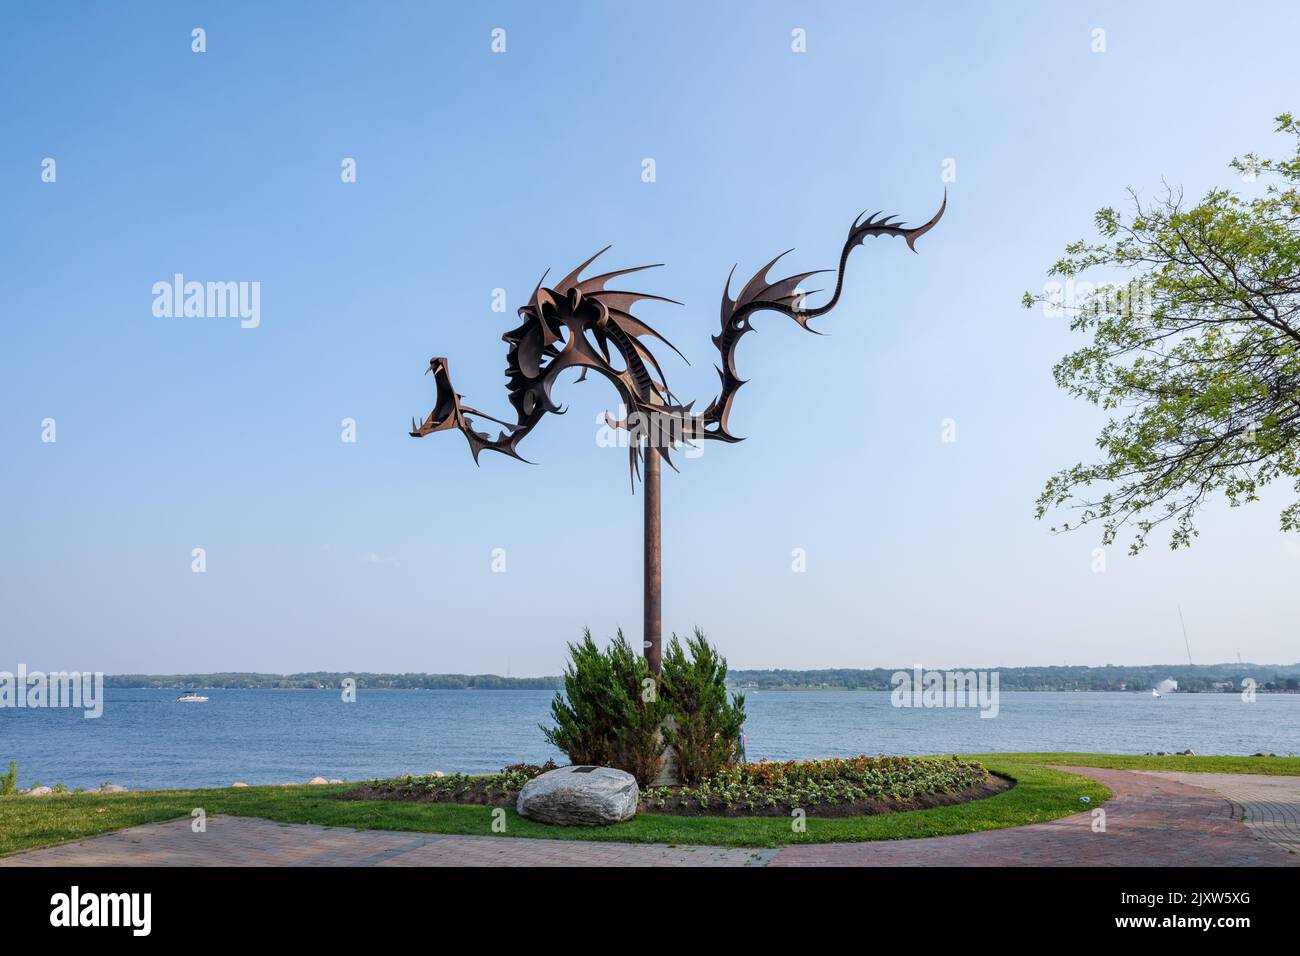 The Sea Serpent Dragon Sculpture at Heritage Park. Barrie, Ontario, Canada Stock Photo